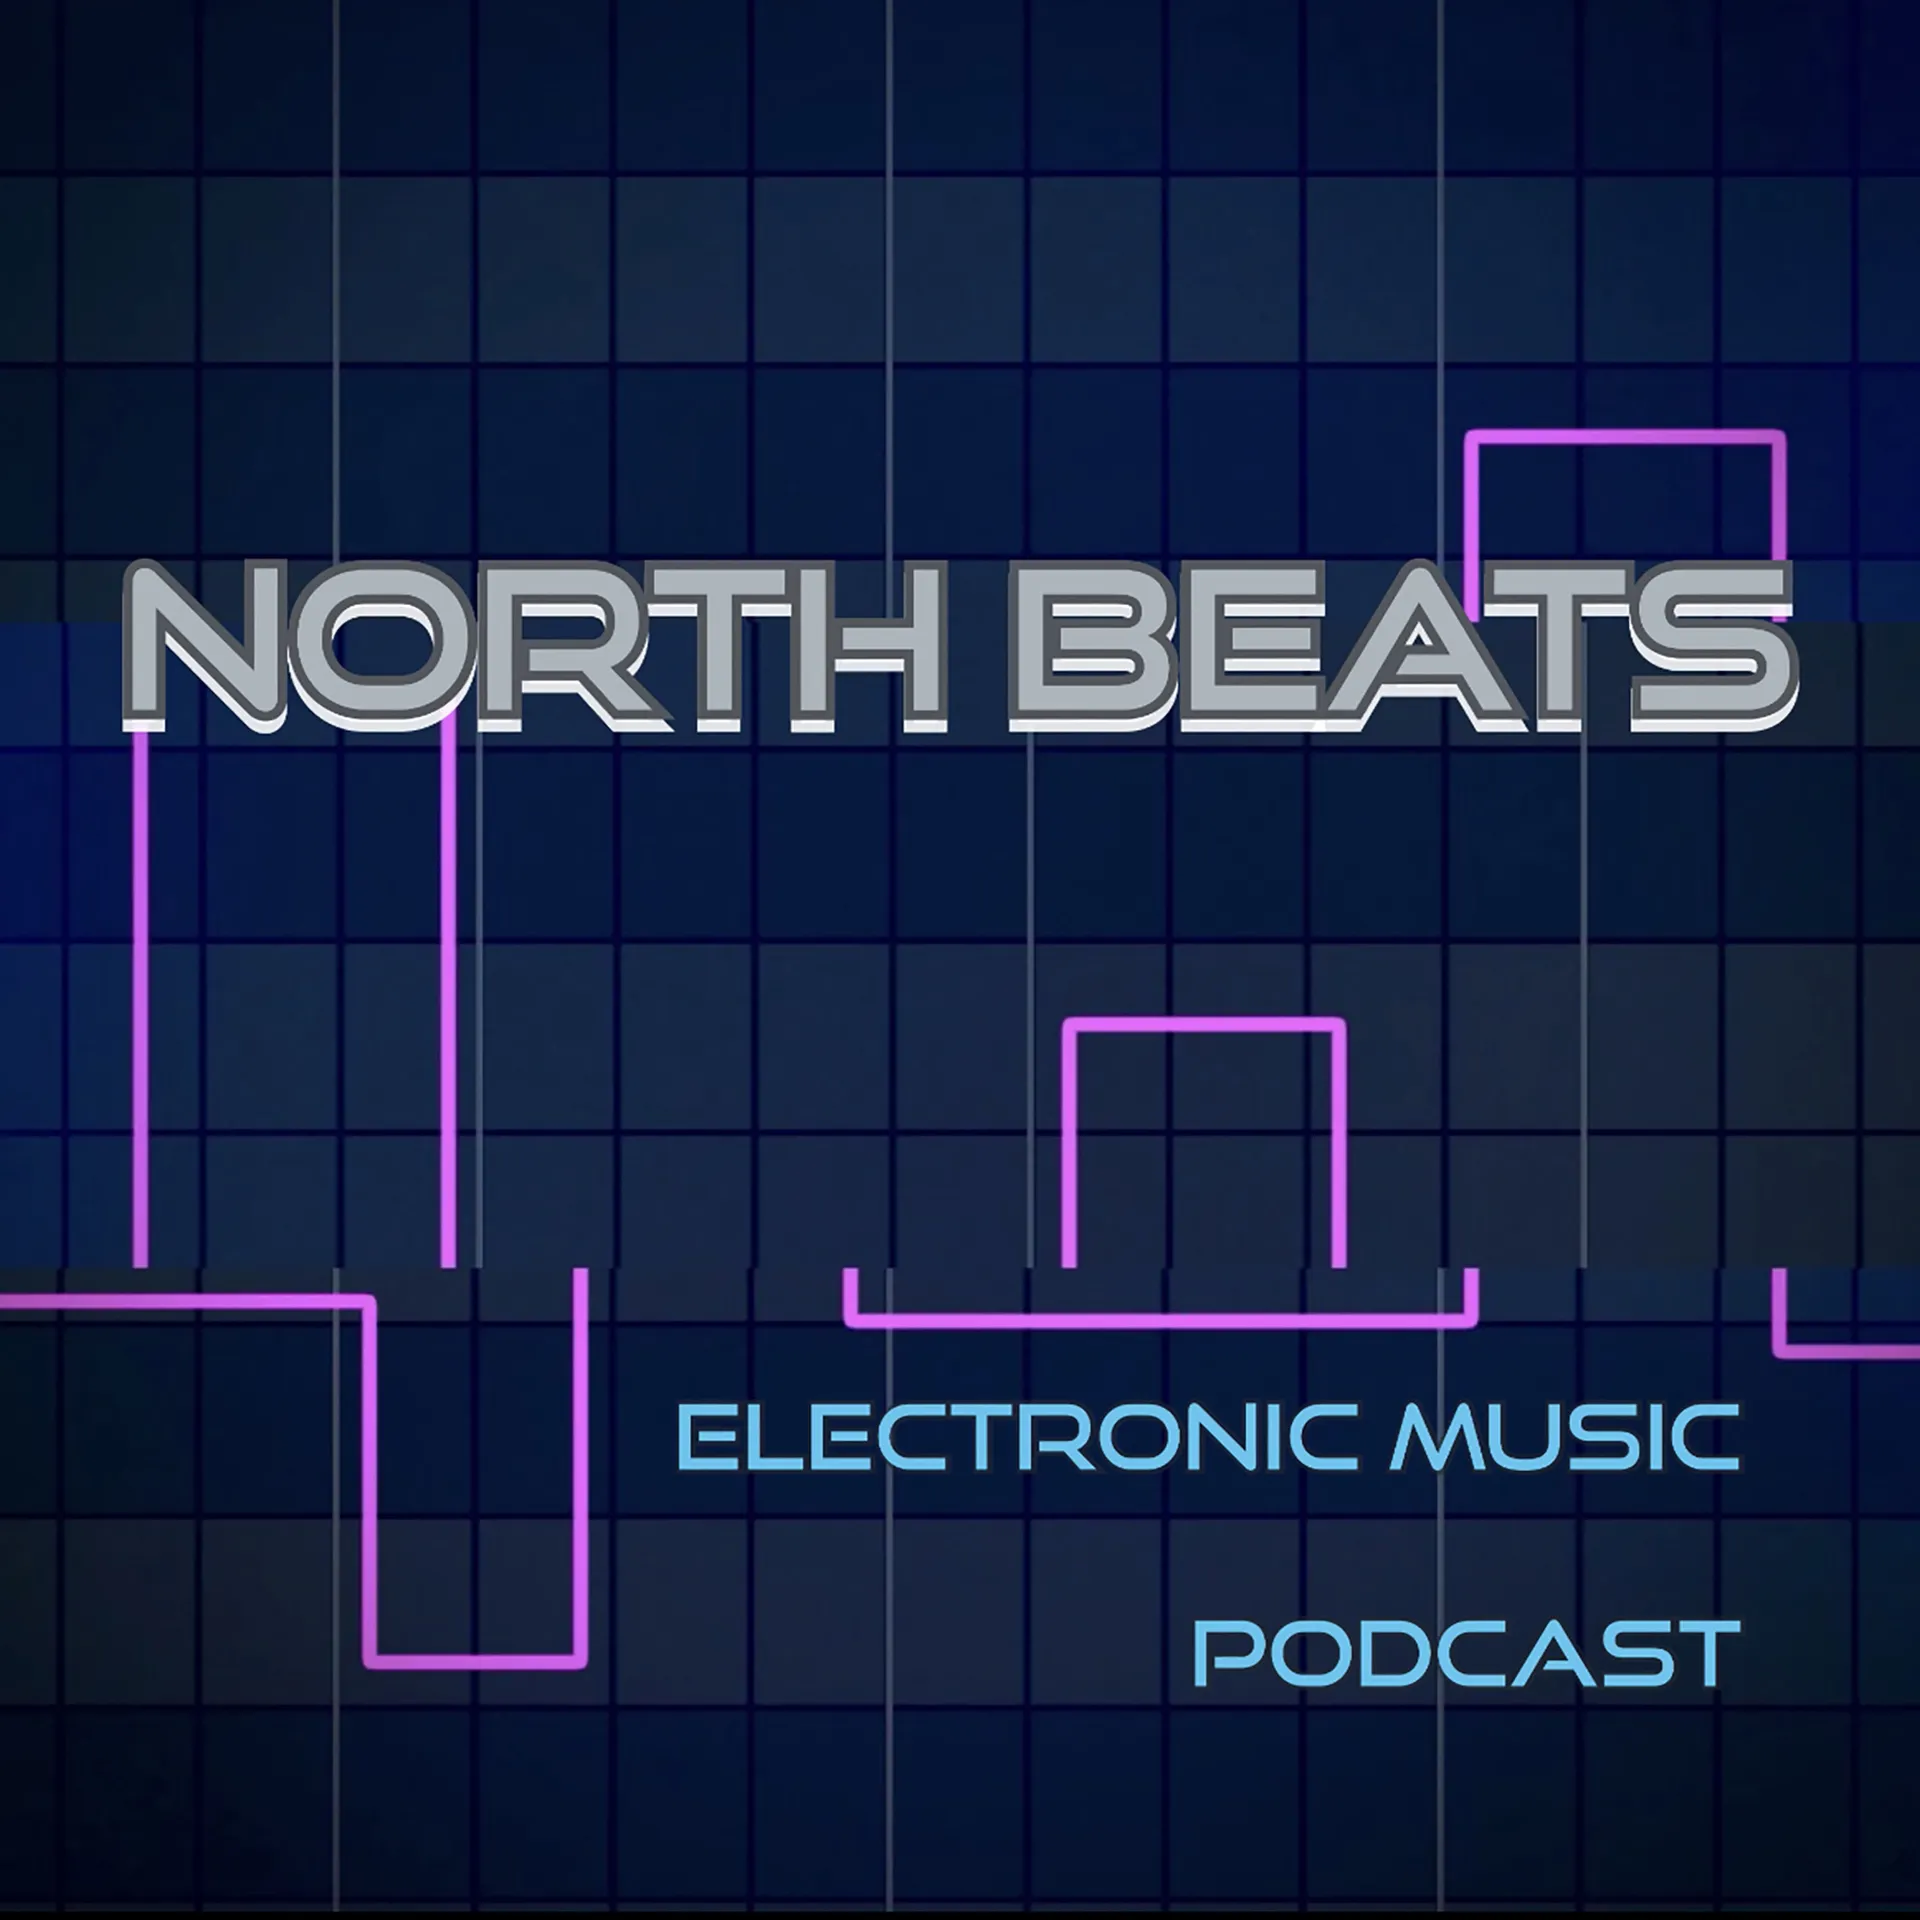 Sarah Turner interview on North Beats podcast